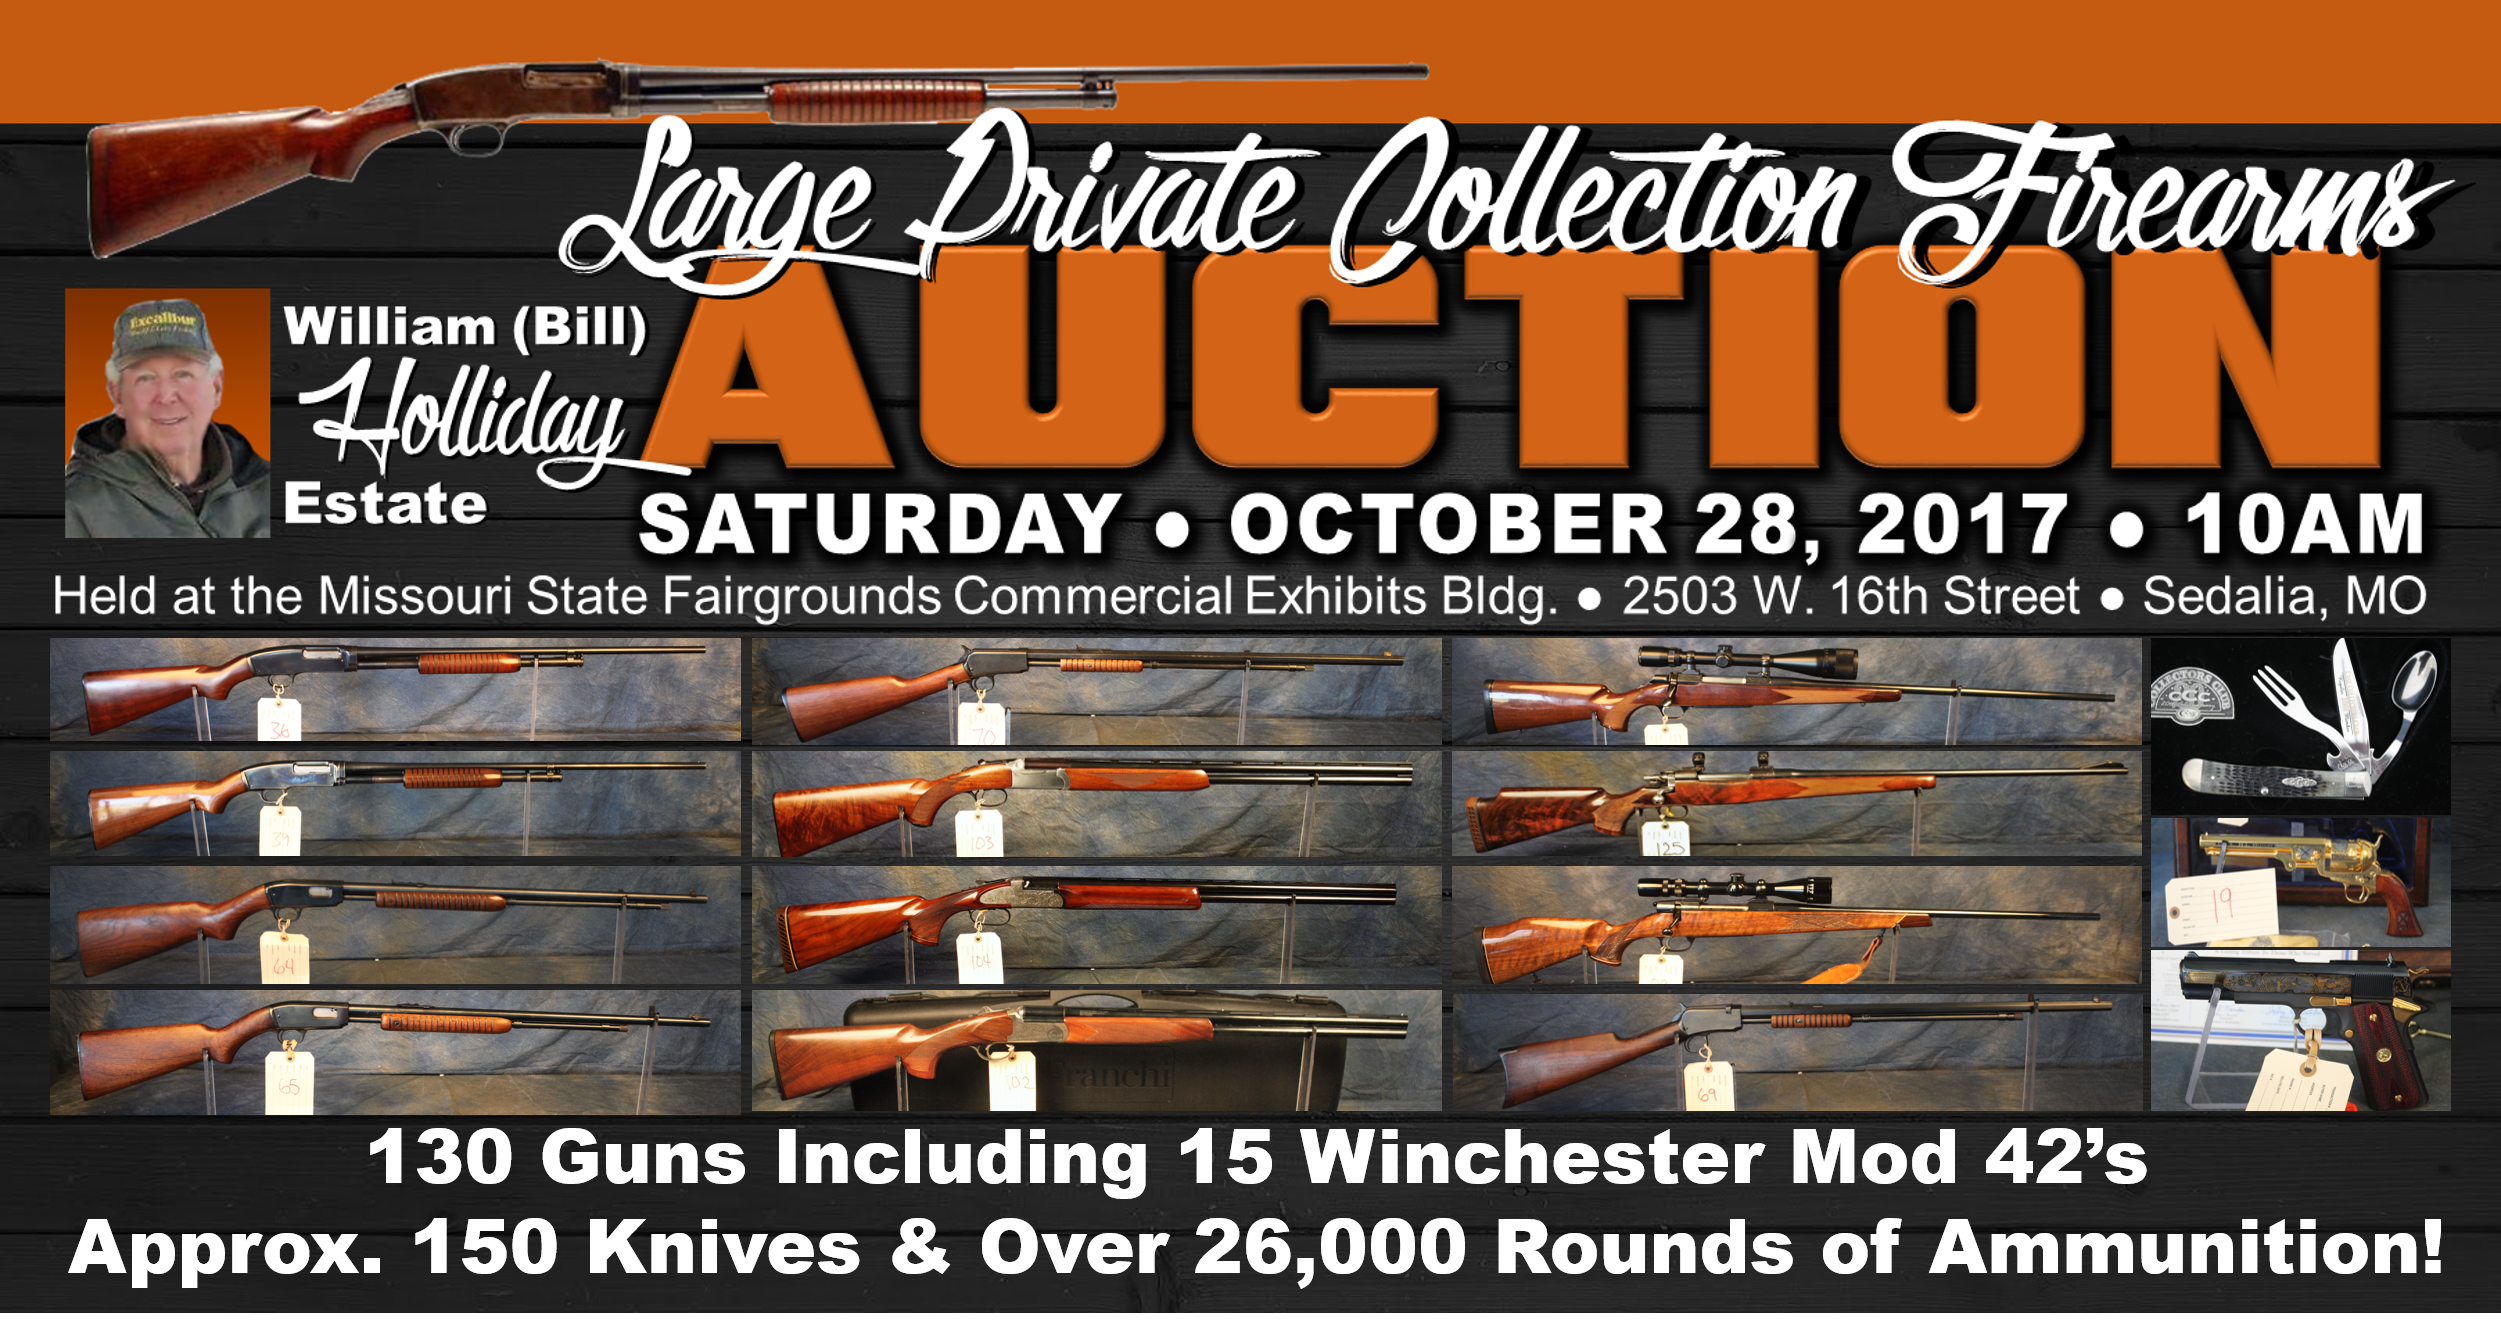 LARGE PRIVATE COLLECTION FIREARM AUCTION